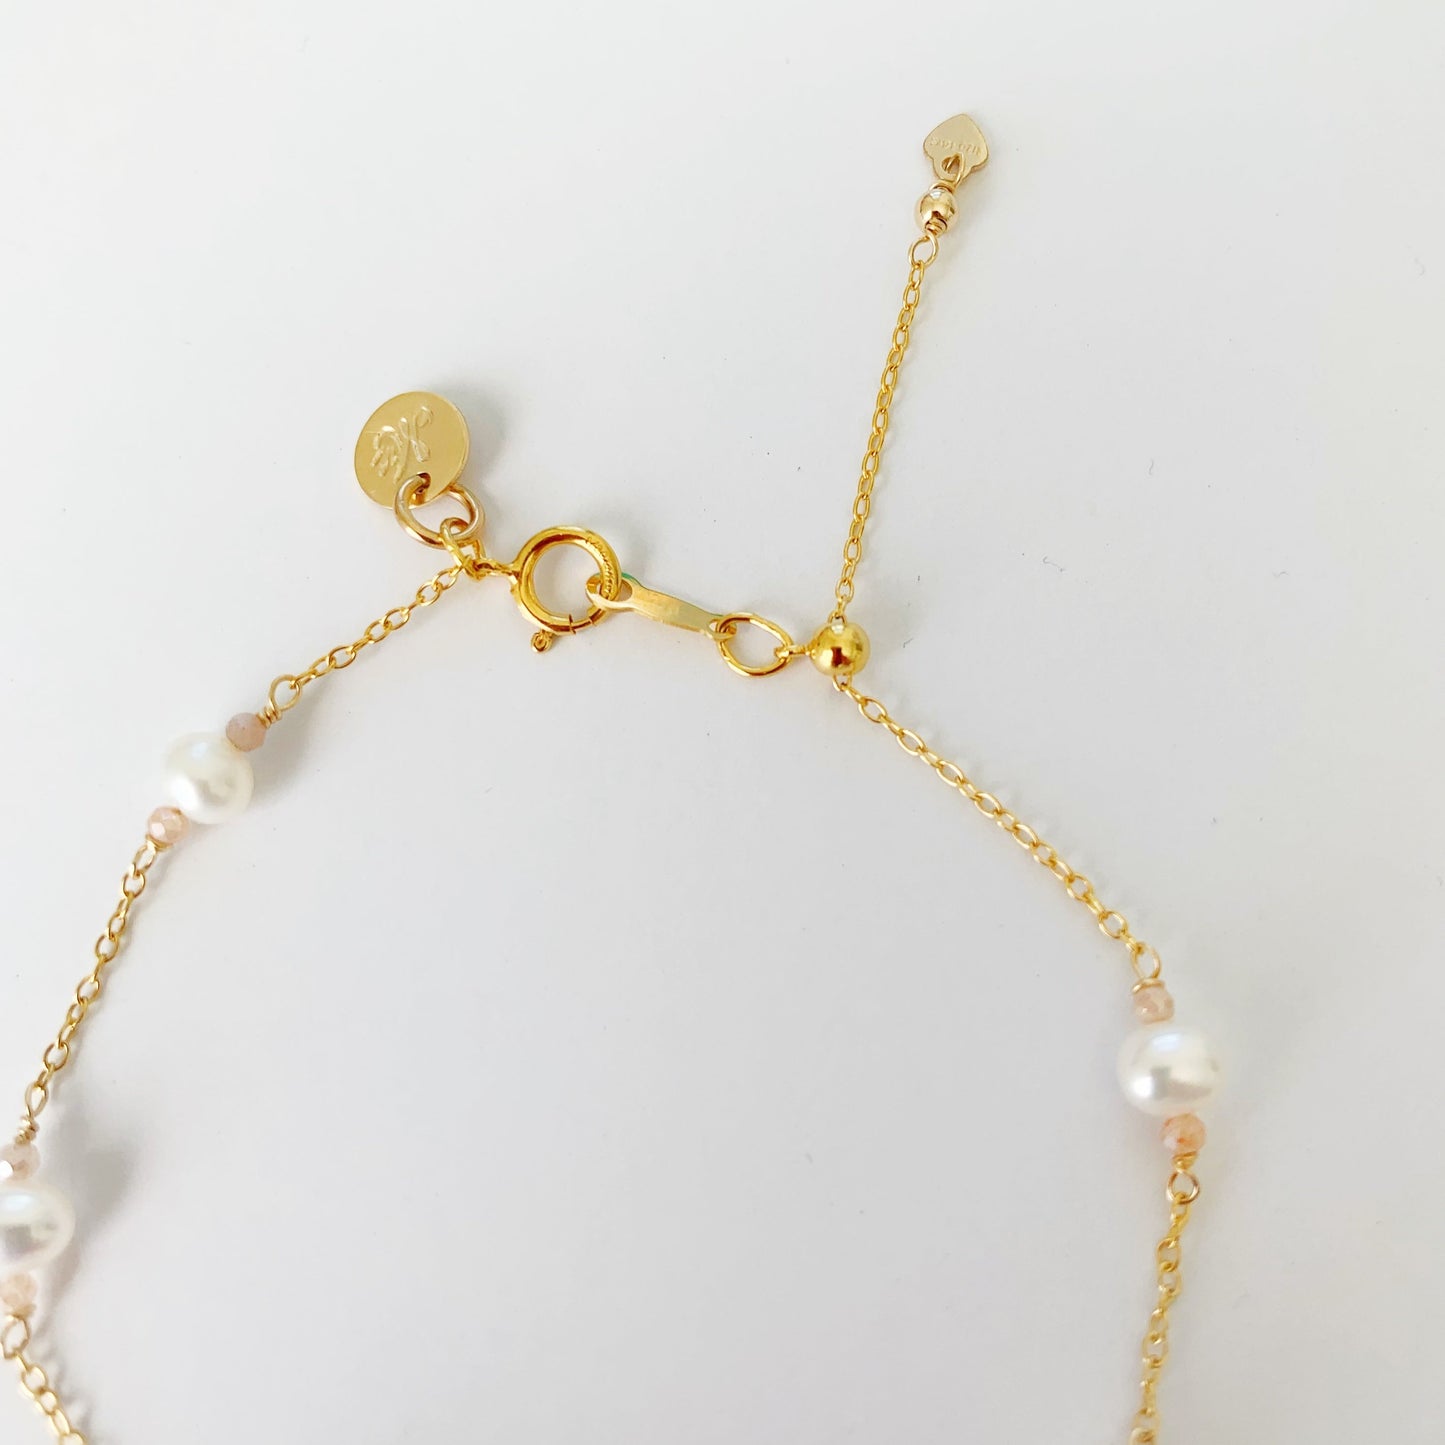 The back of the barrinton bracelet shows that it has a spring ring clasp and a slide bead to adjust the bracelet length. This is pictured over a white background